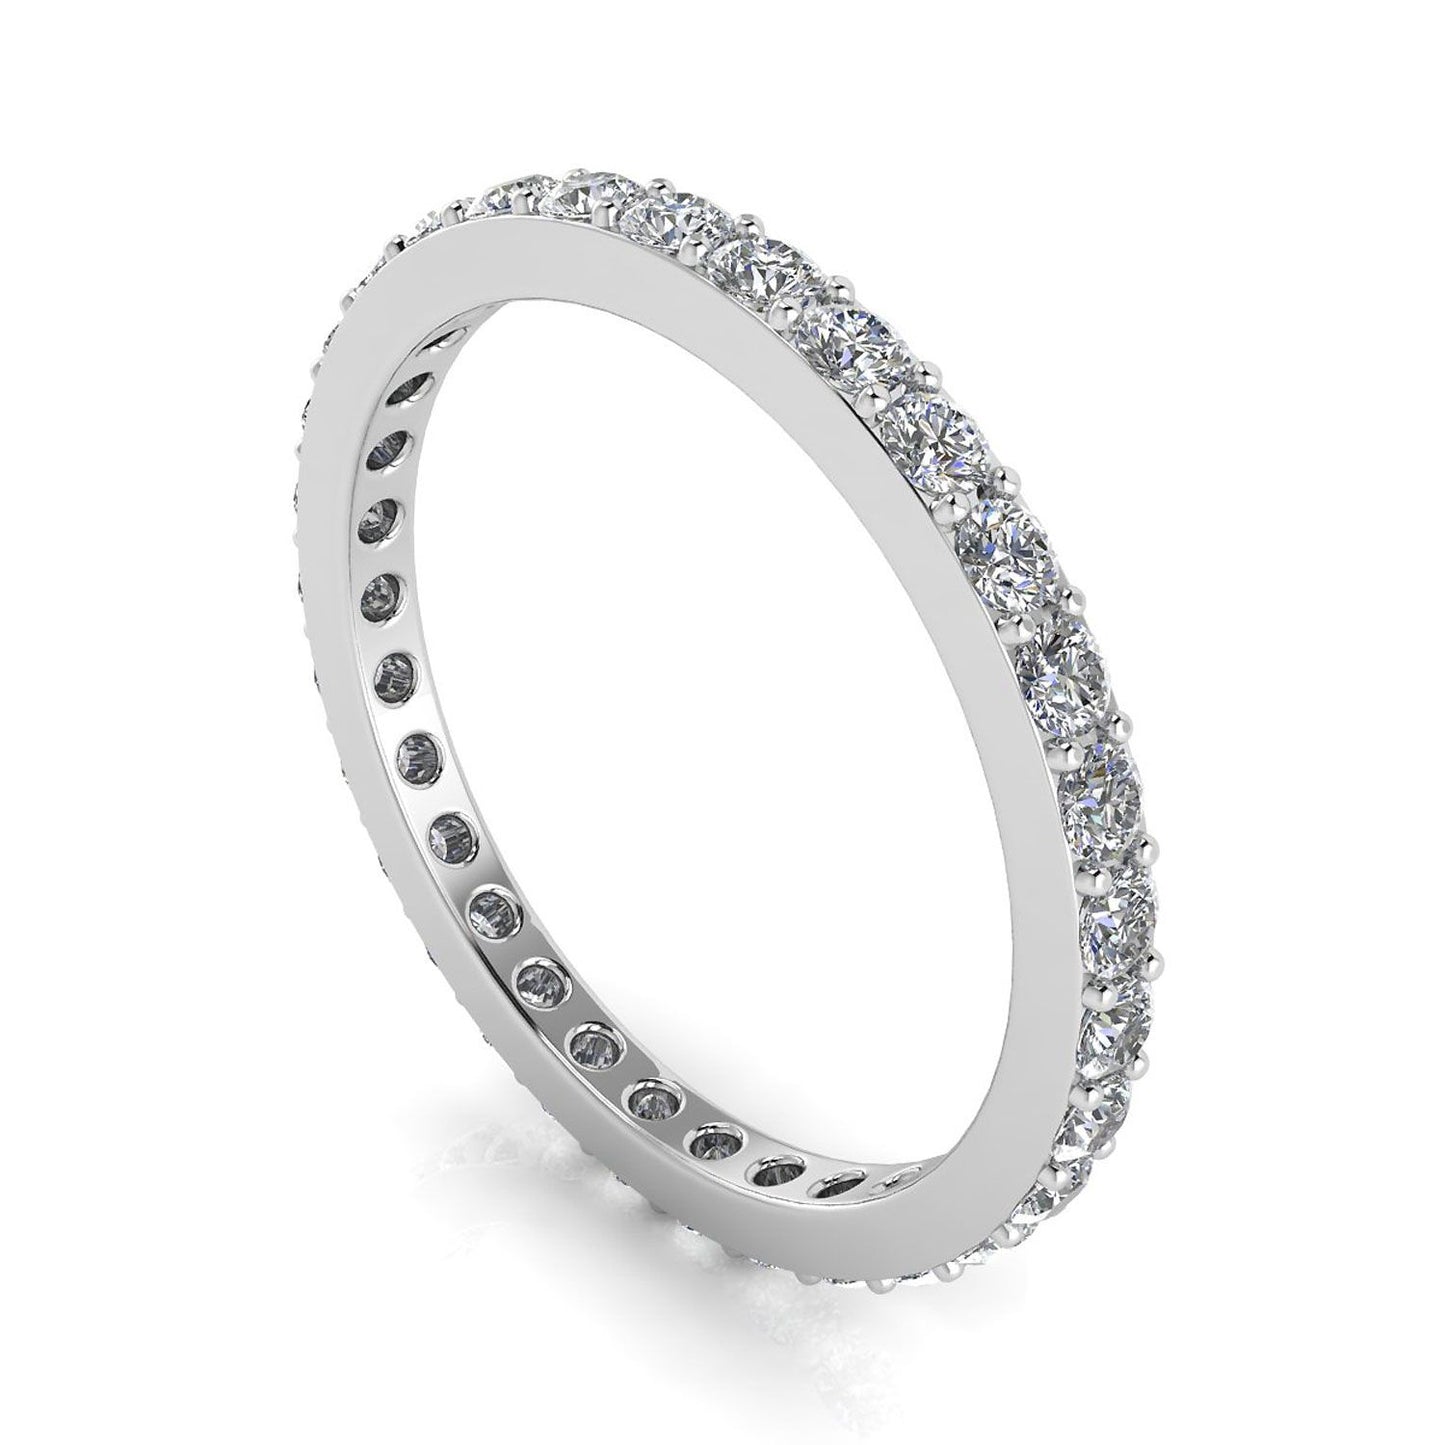 Round Brilliant Cut Diamond Pave Set Eternity Ring In 14k White Gold  (1.43ct. Tw.) Ring Size 5.5